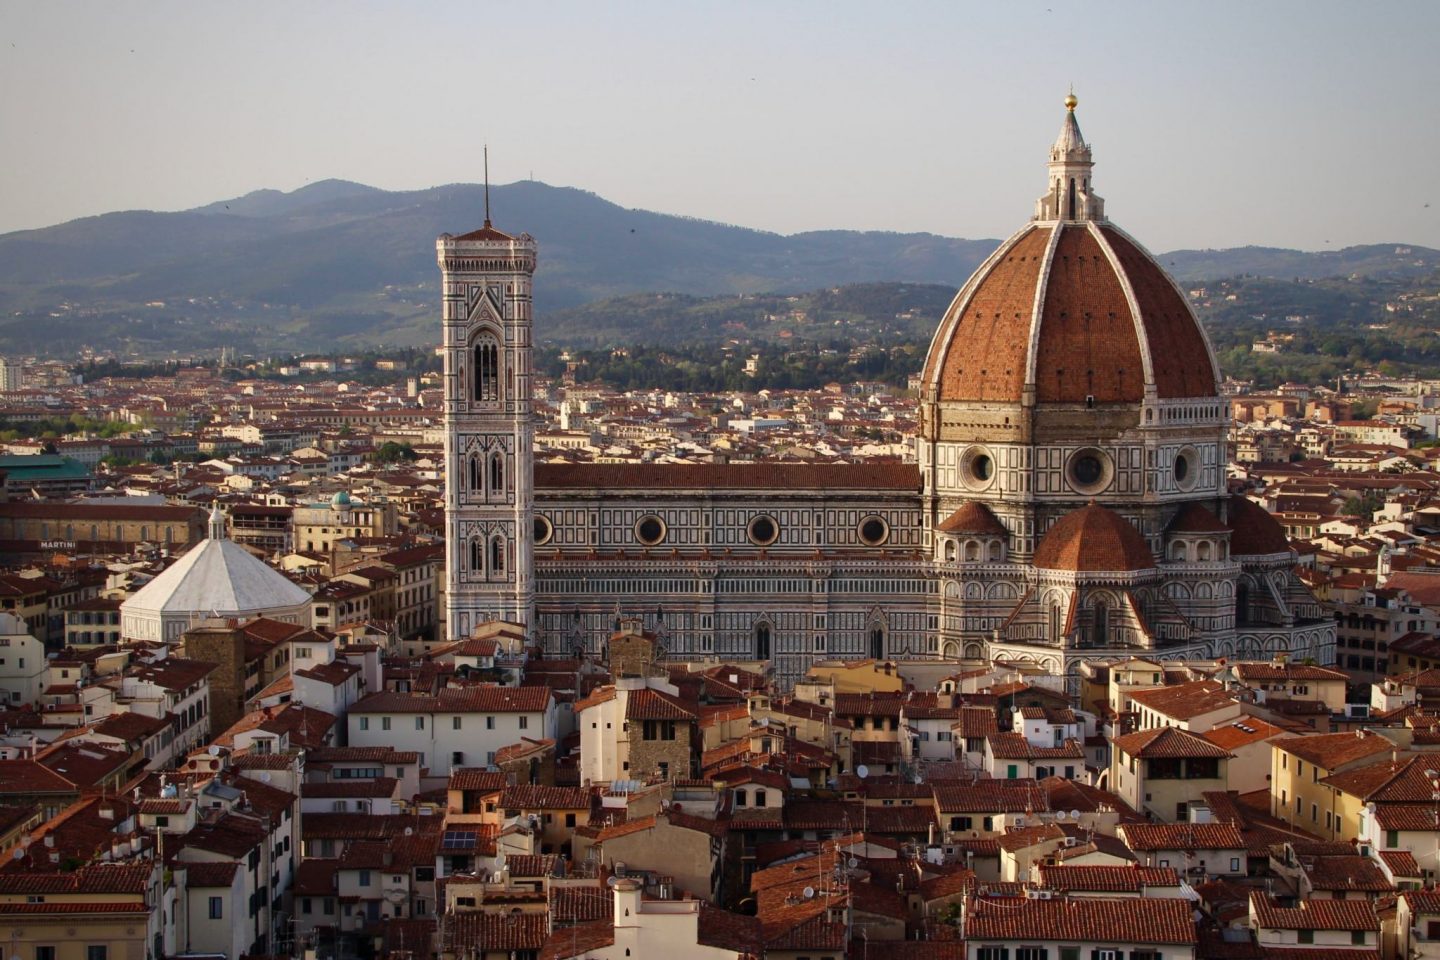 The Duomo ... What to do in Florence ... The Spectacular Adventurer